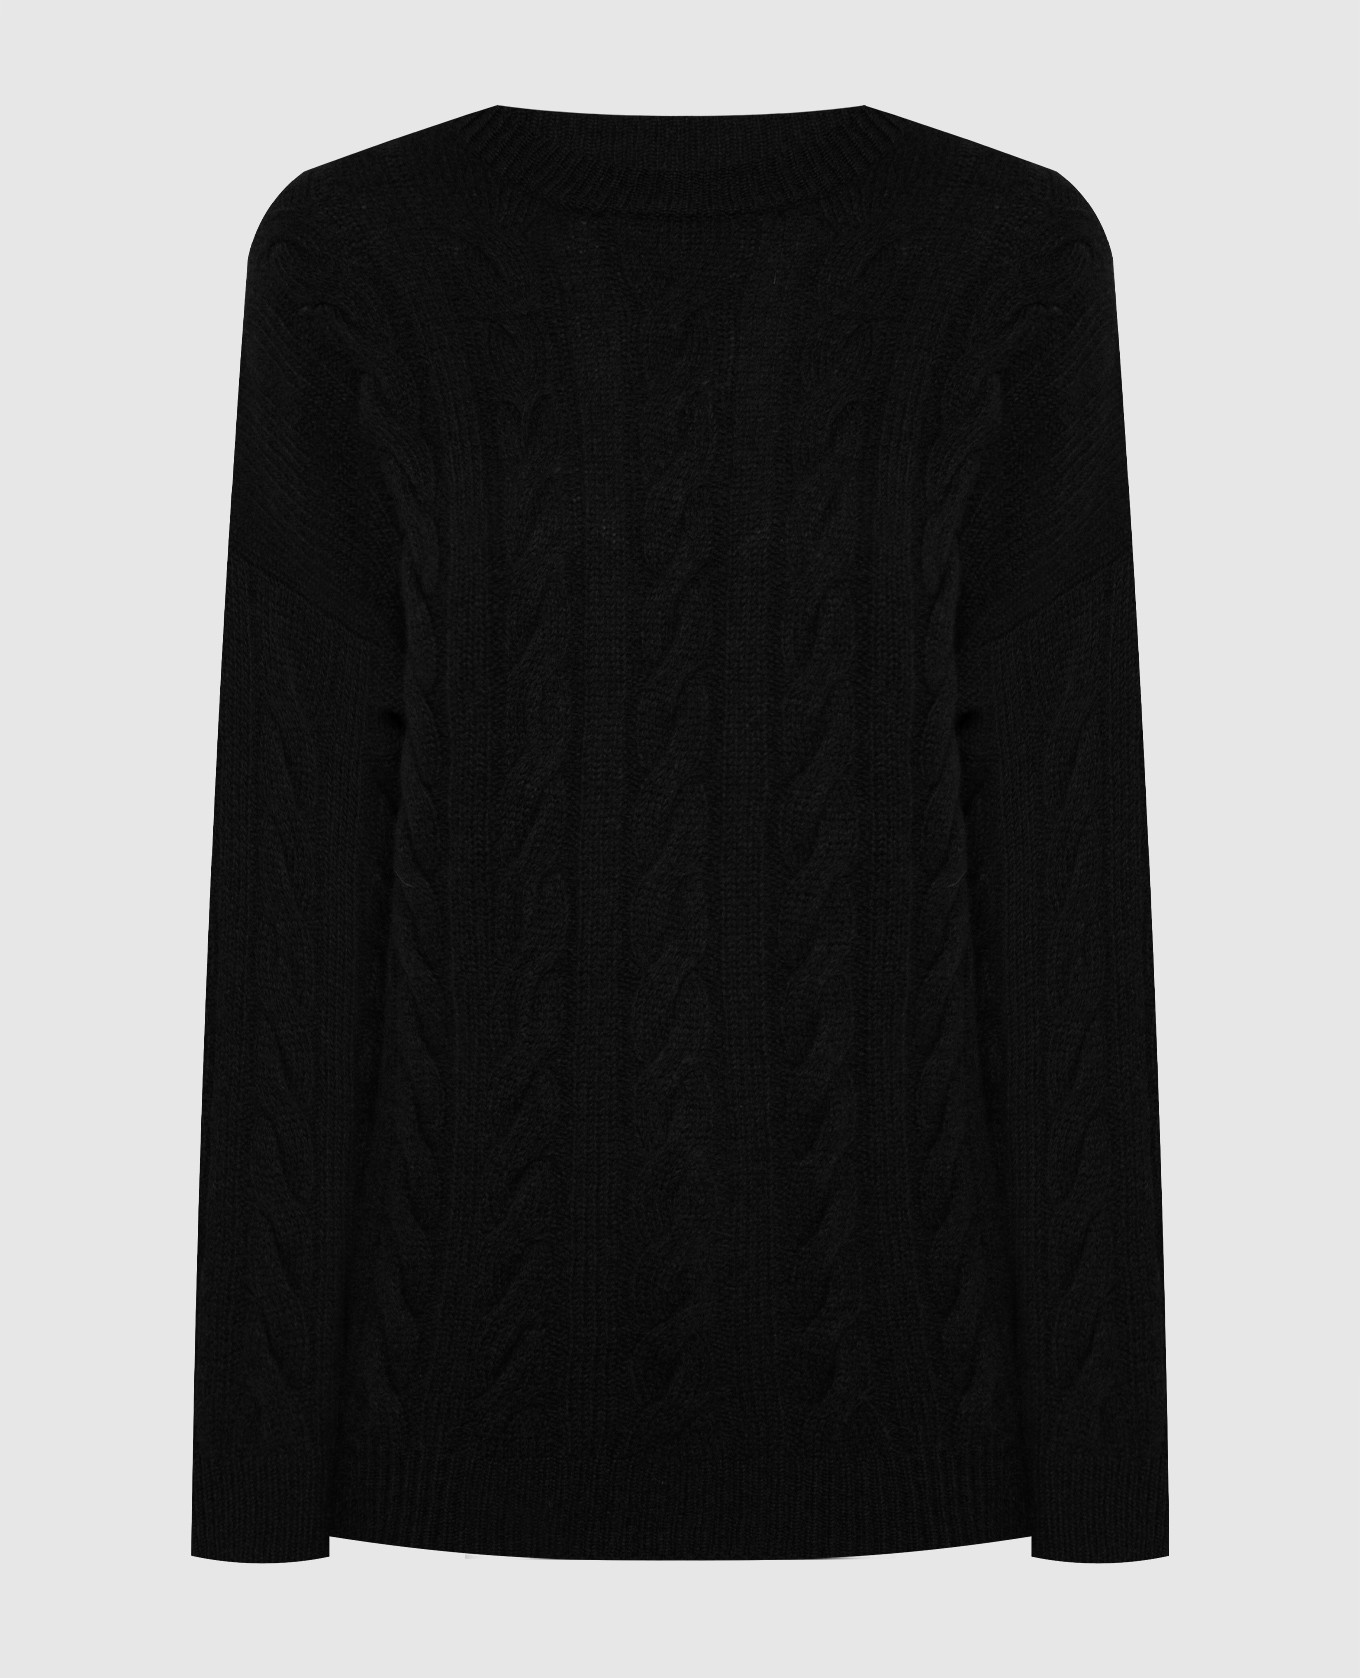 Black sweater made of wool and cashmere in a textured pattern